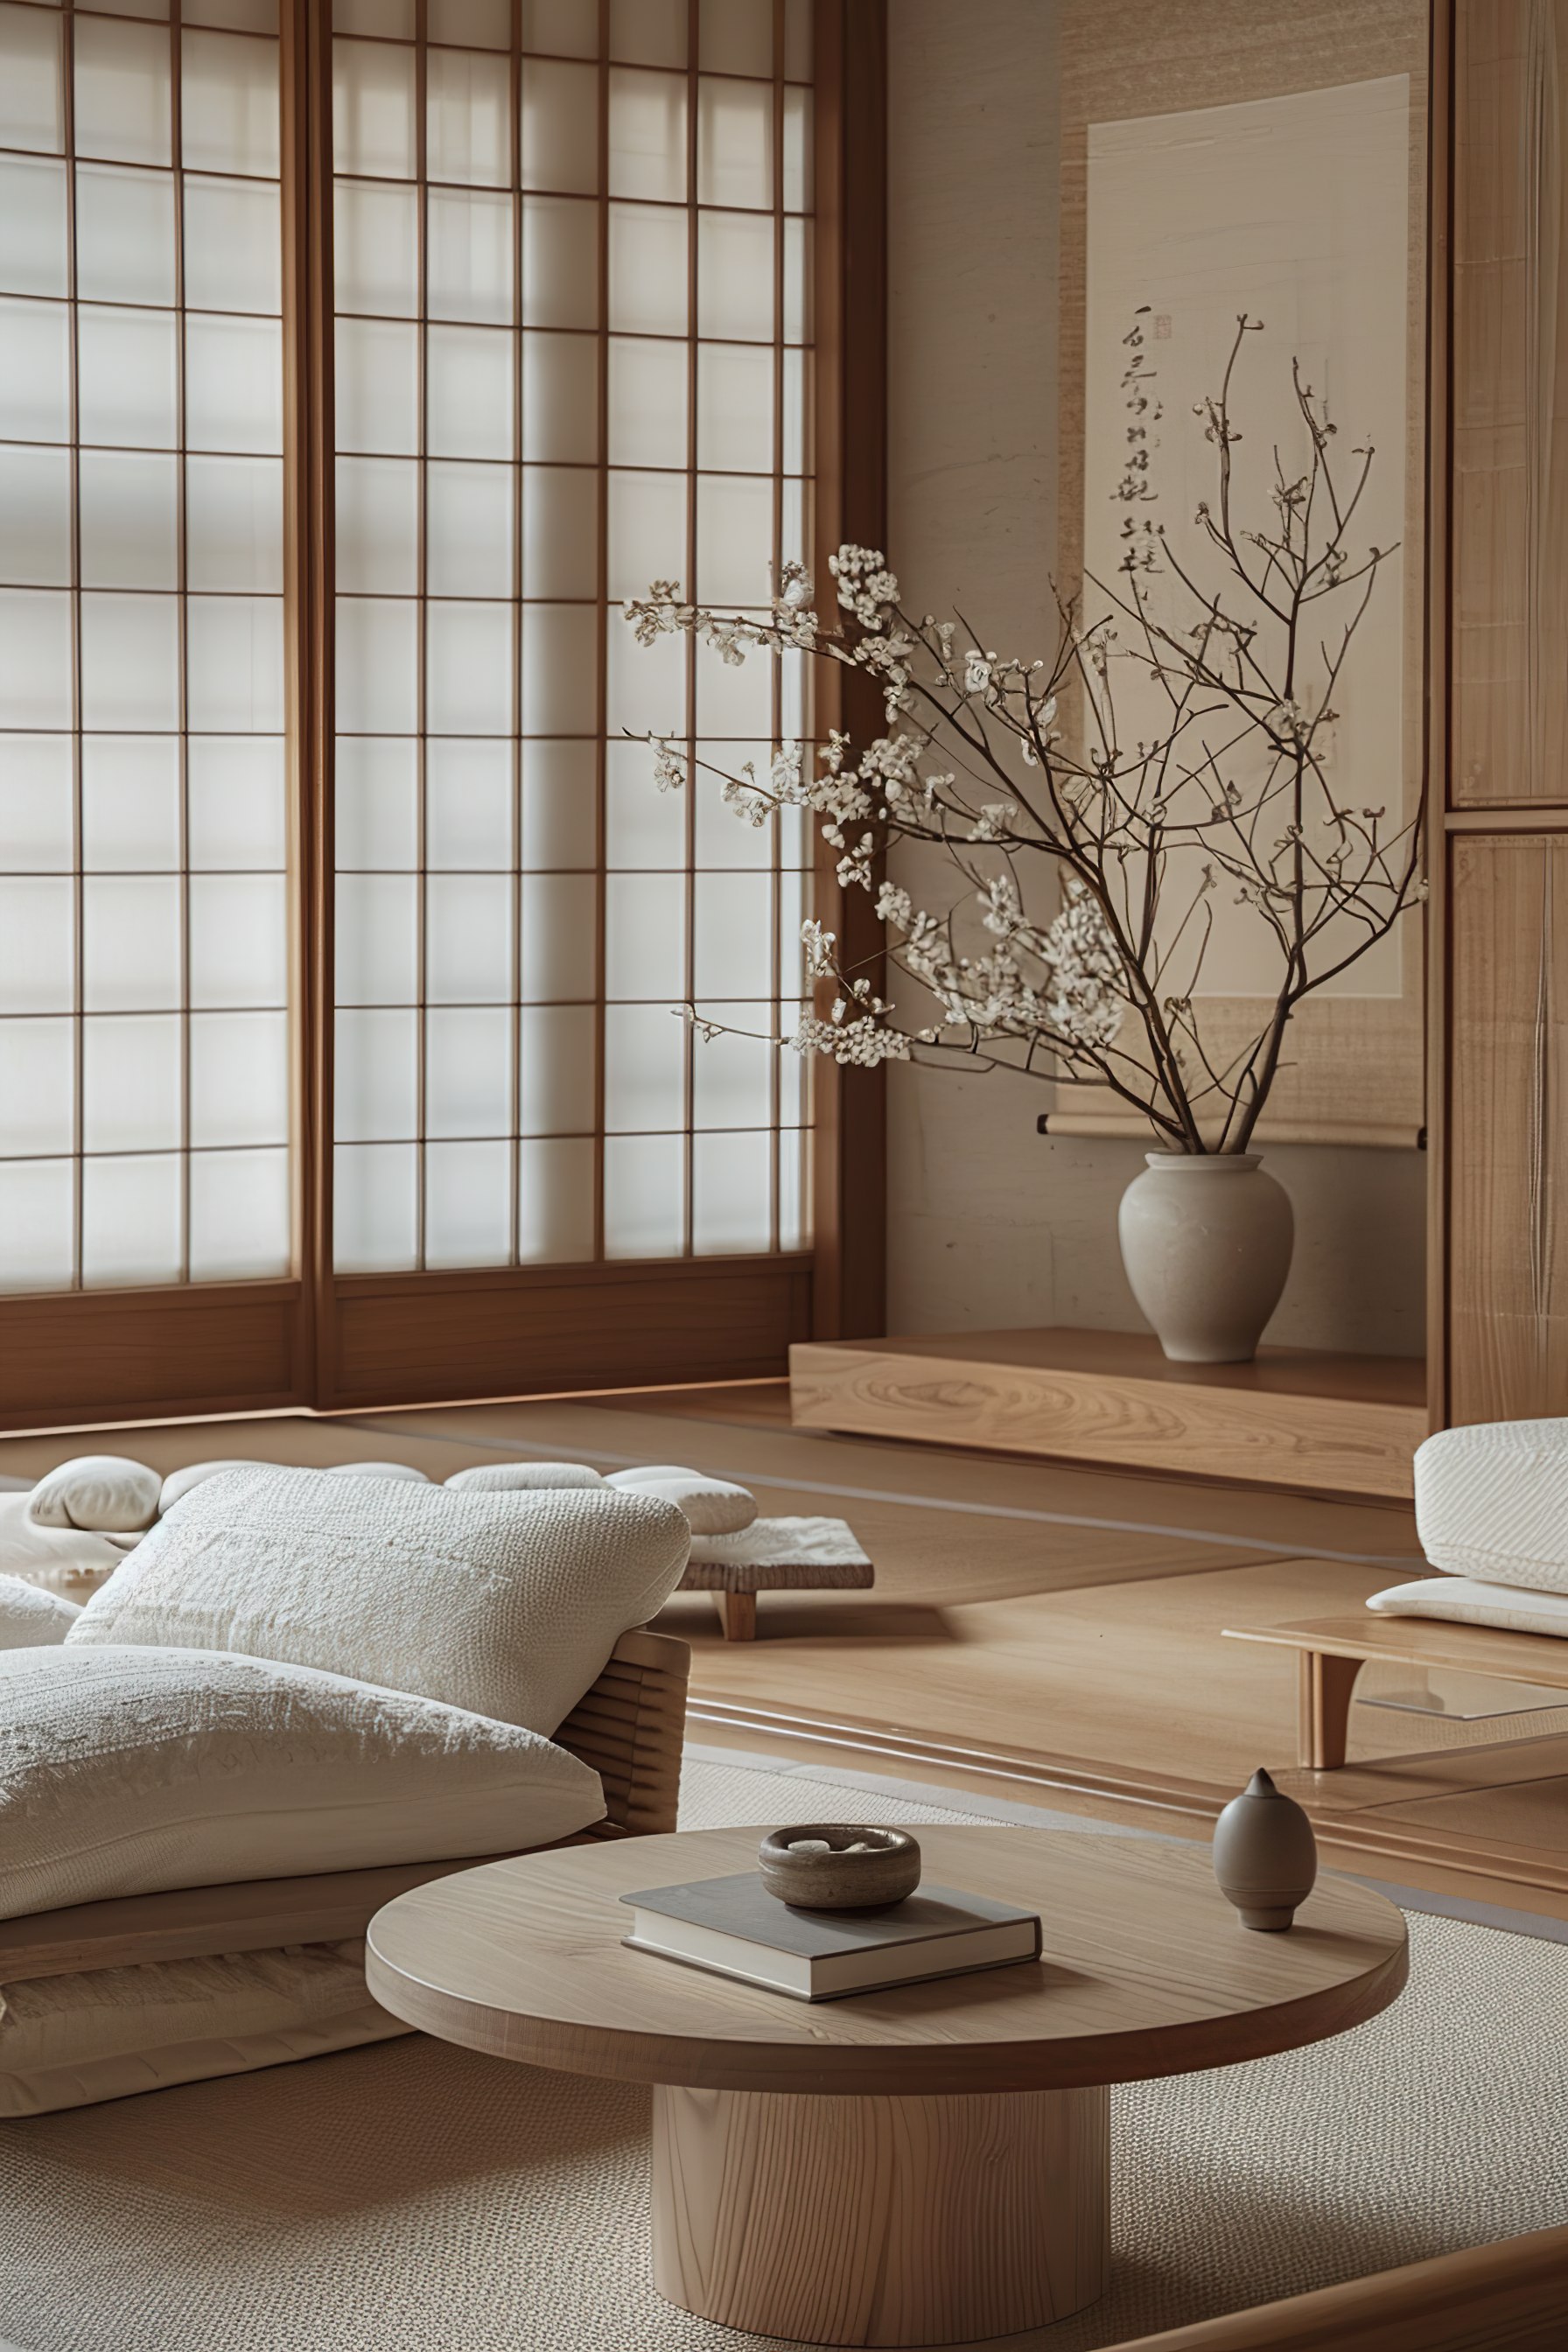 A serene Japanese-style room with tatami floors, shoji screens, minimalist wooden furniture, and a vase with blossoming branches.